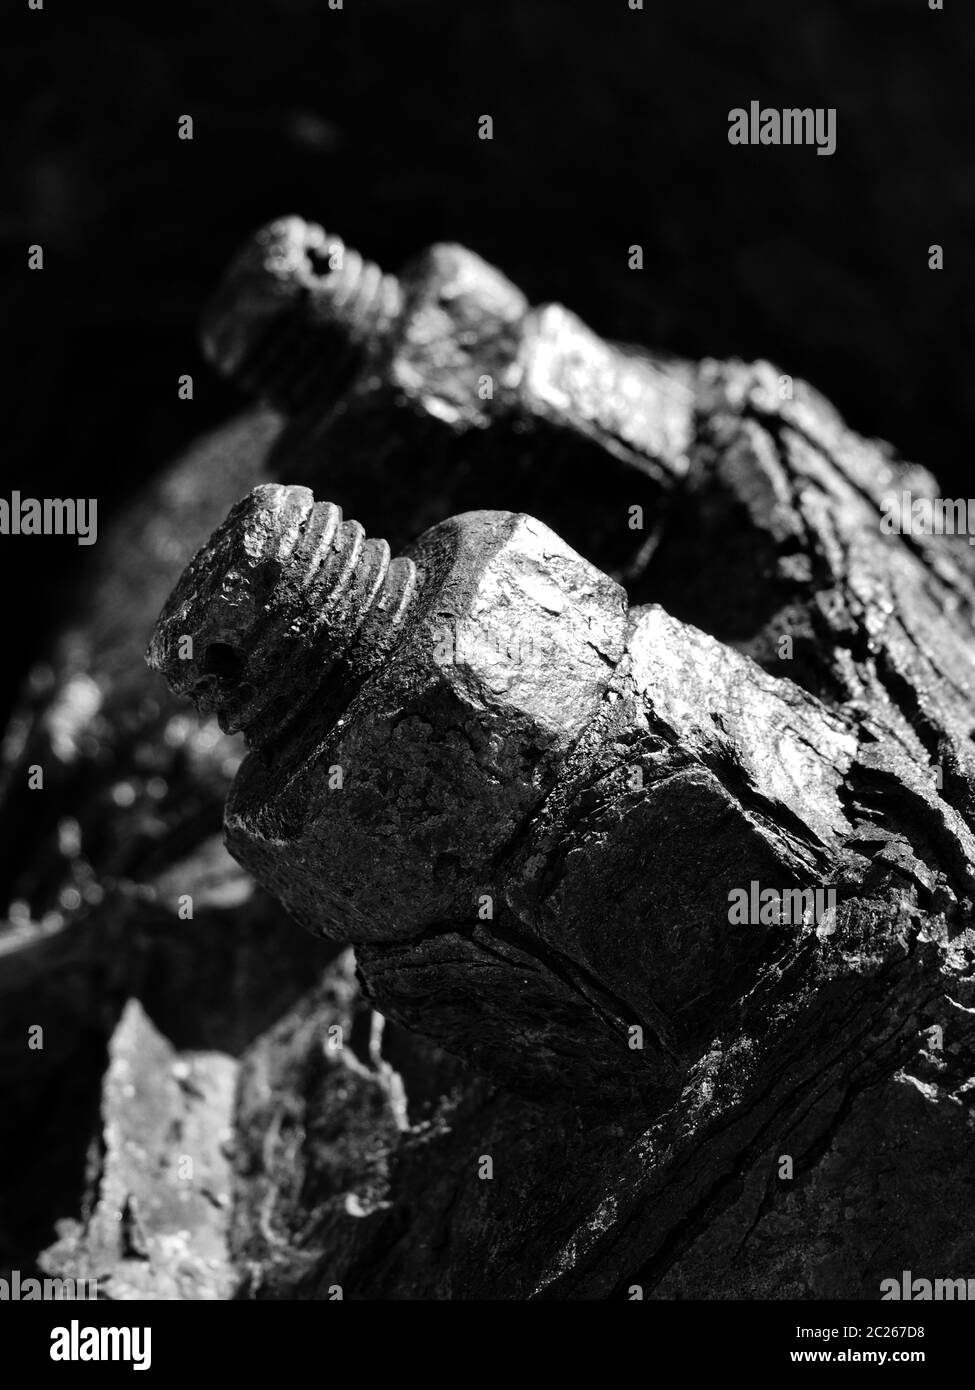 a monochrome close up of rusted threaded bolts and nuts on old corroded machinery Stock Photo